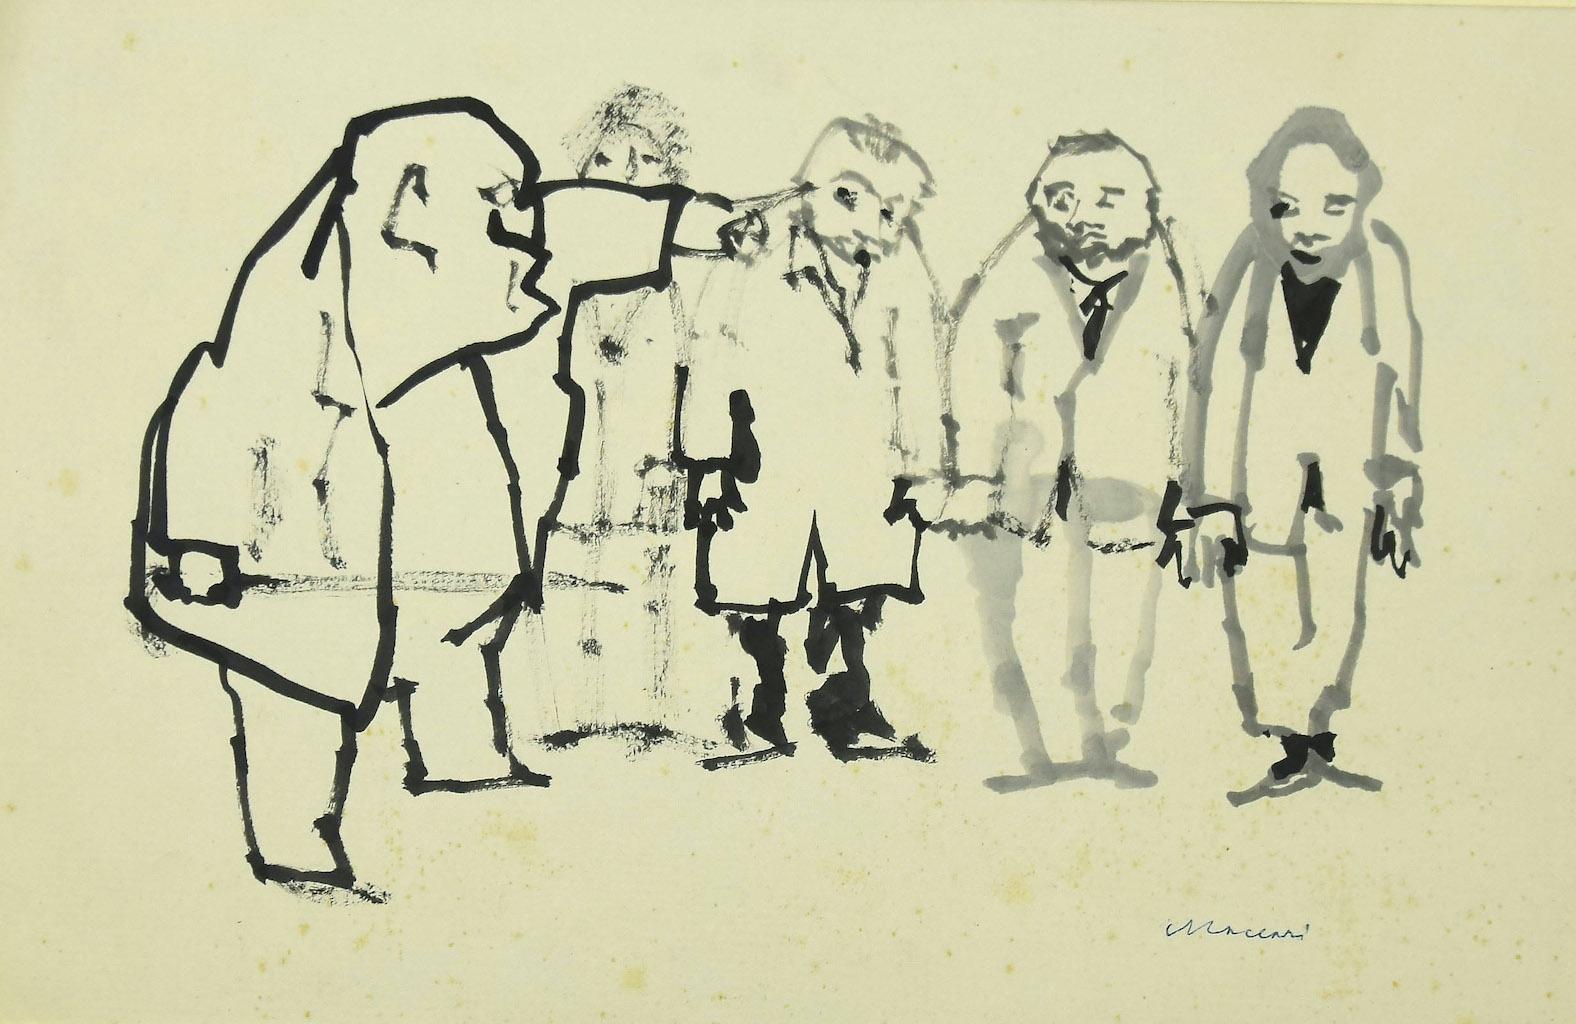 The Order is an original drawing artwork in black marker and watercolor on paper realized by Mino Maccari in the 1960s.

Hand-signed by the artist on the lower right.

Good conditions except for diffused foxings along the margins.

Passepartout